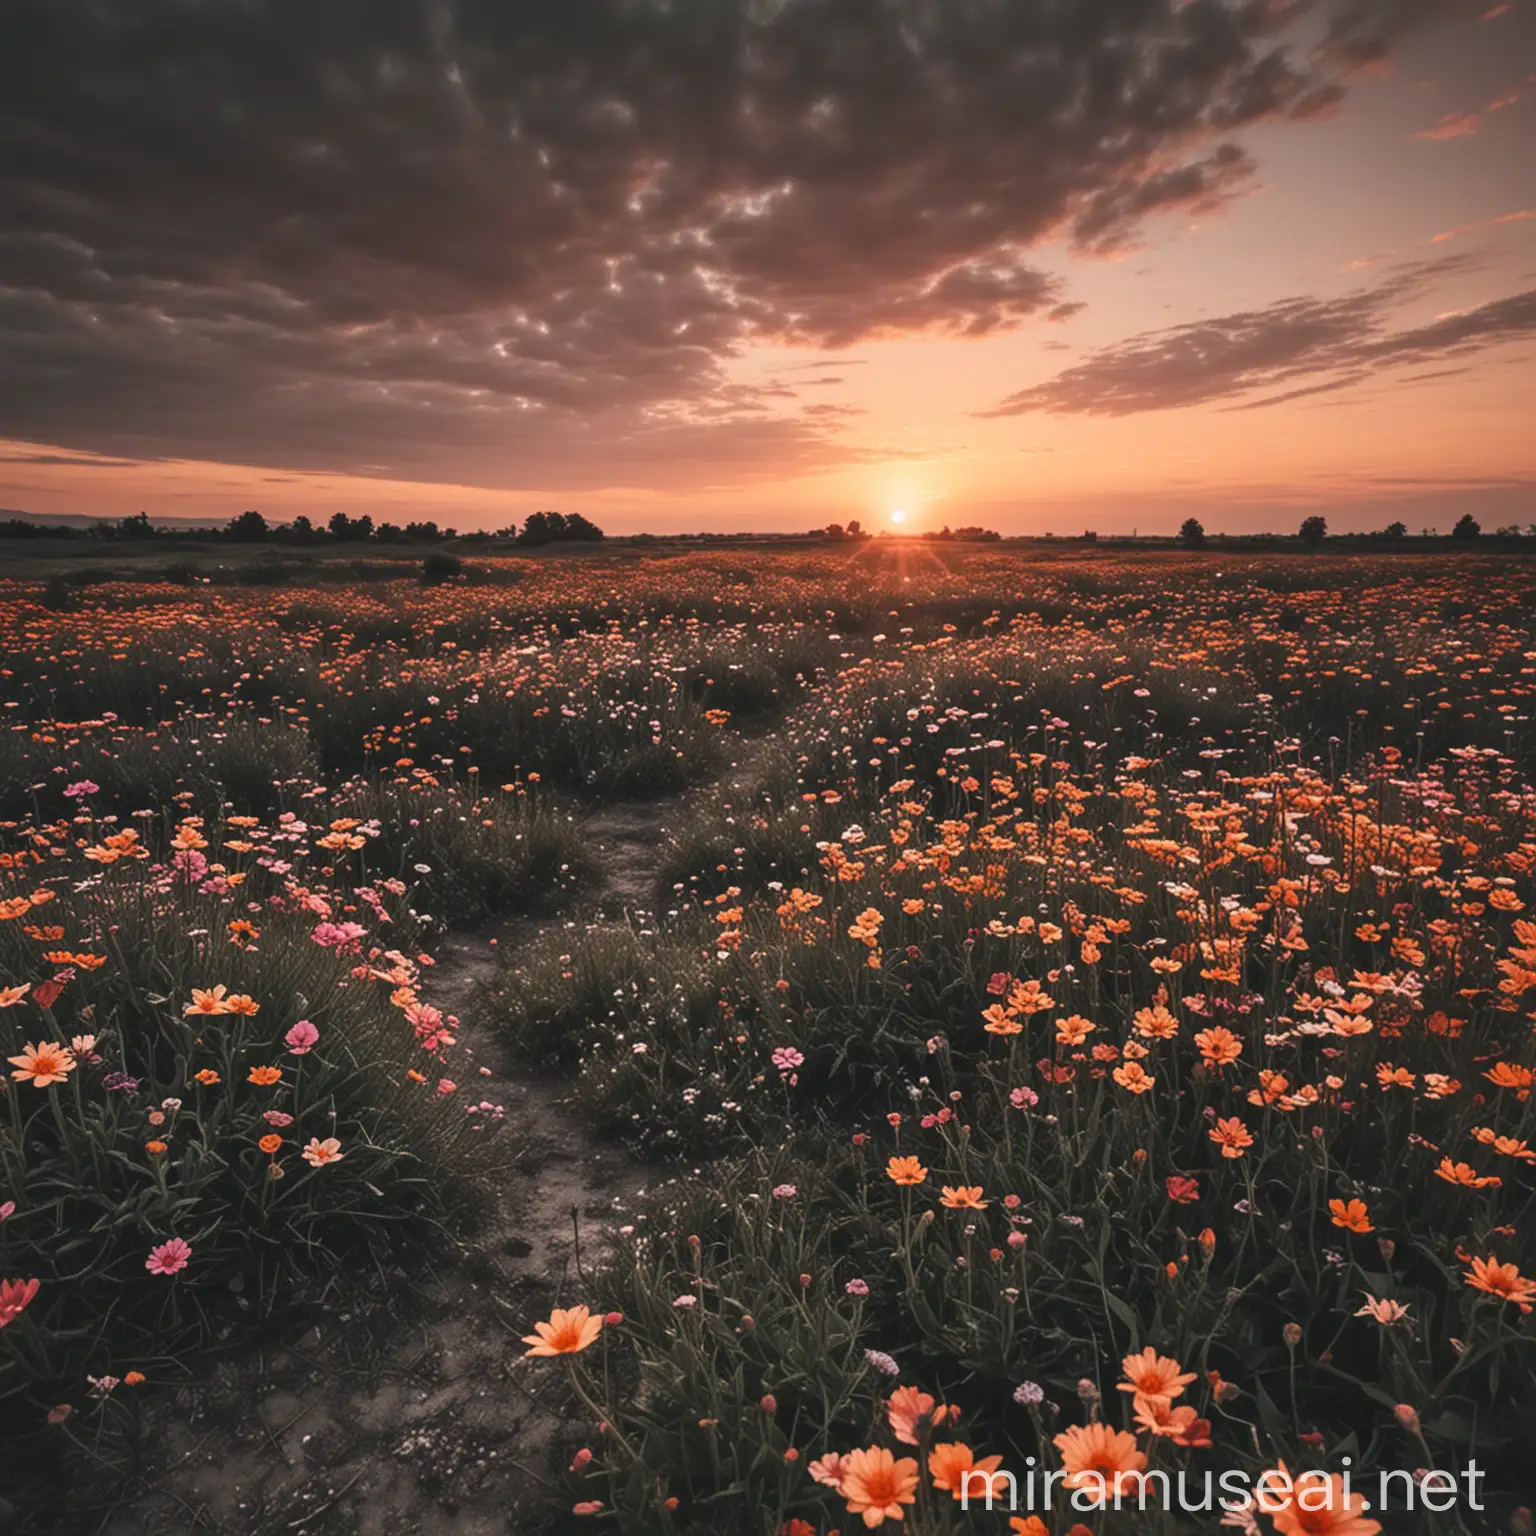 land of flowers, sunset, half color half desaturated